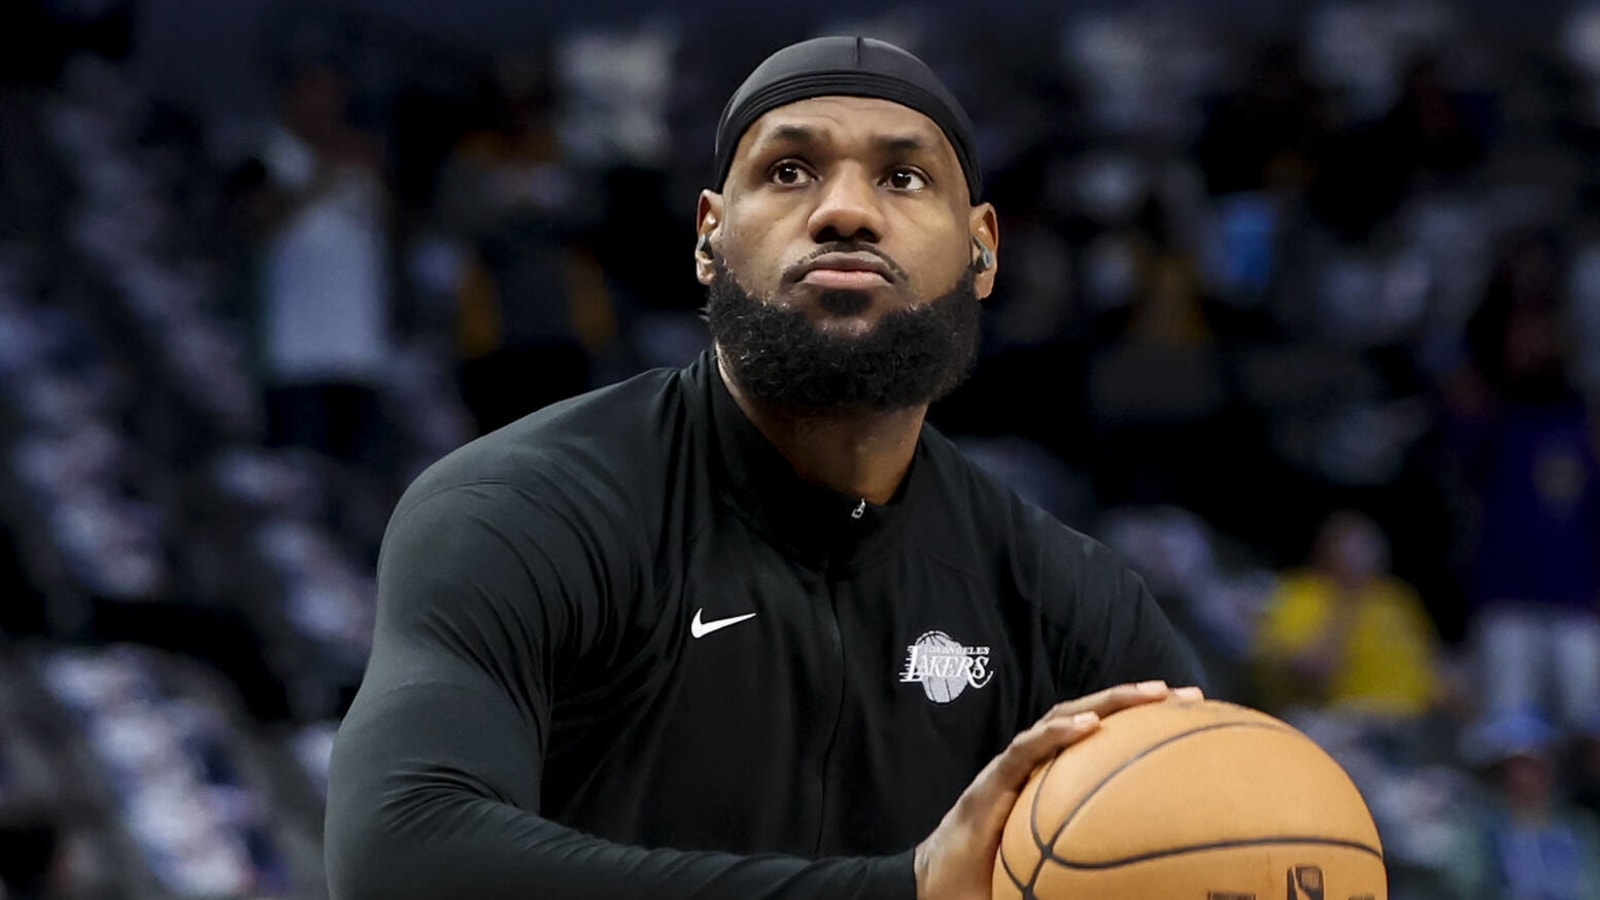 Video reveals what LeBron James said to Patrick Mahomes during game